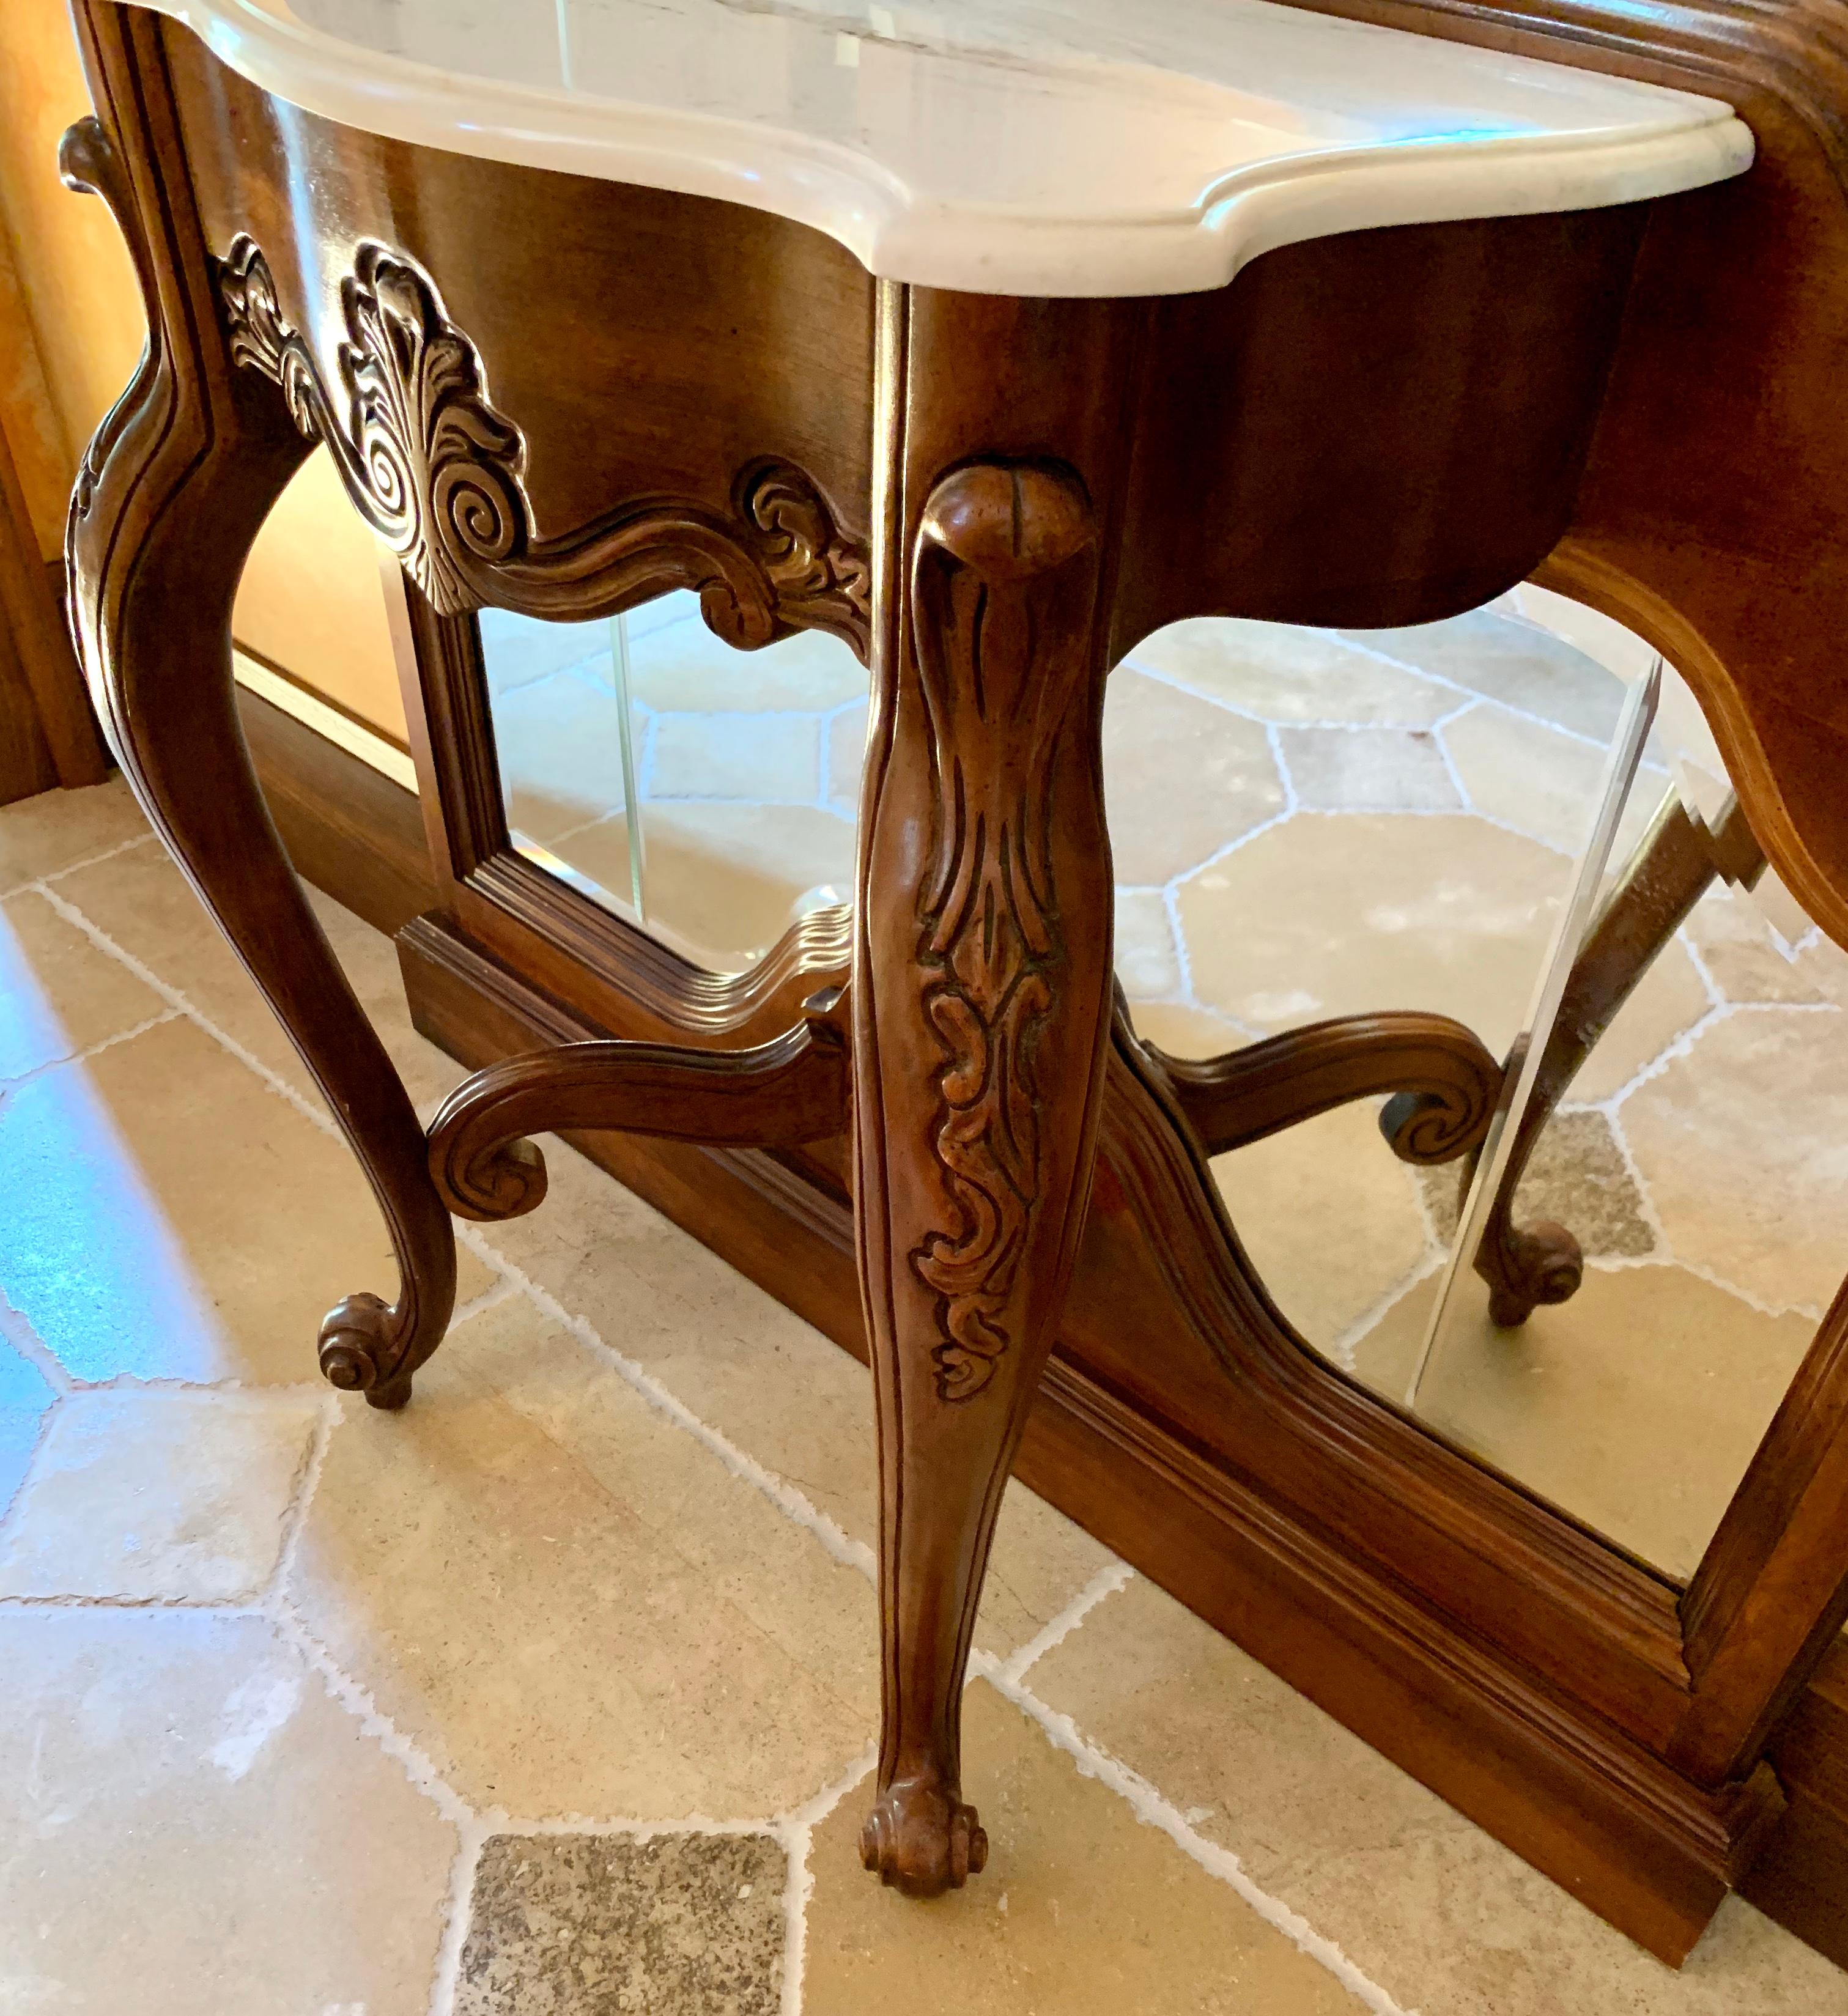 Elegant carved mahogany vintage floor mirror with attached marble-top console table that is 30 inches high. All other dimensions are below. Perfect for bedroom or mudroom/foyer/entrance.
Now, more than ever, home is where the heart is.